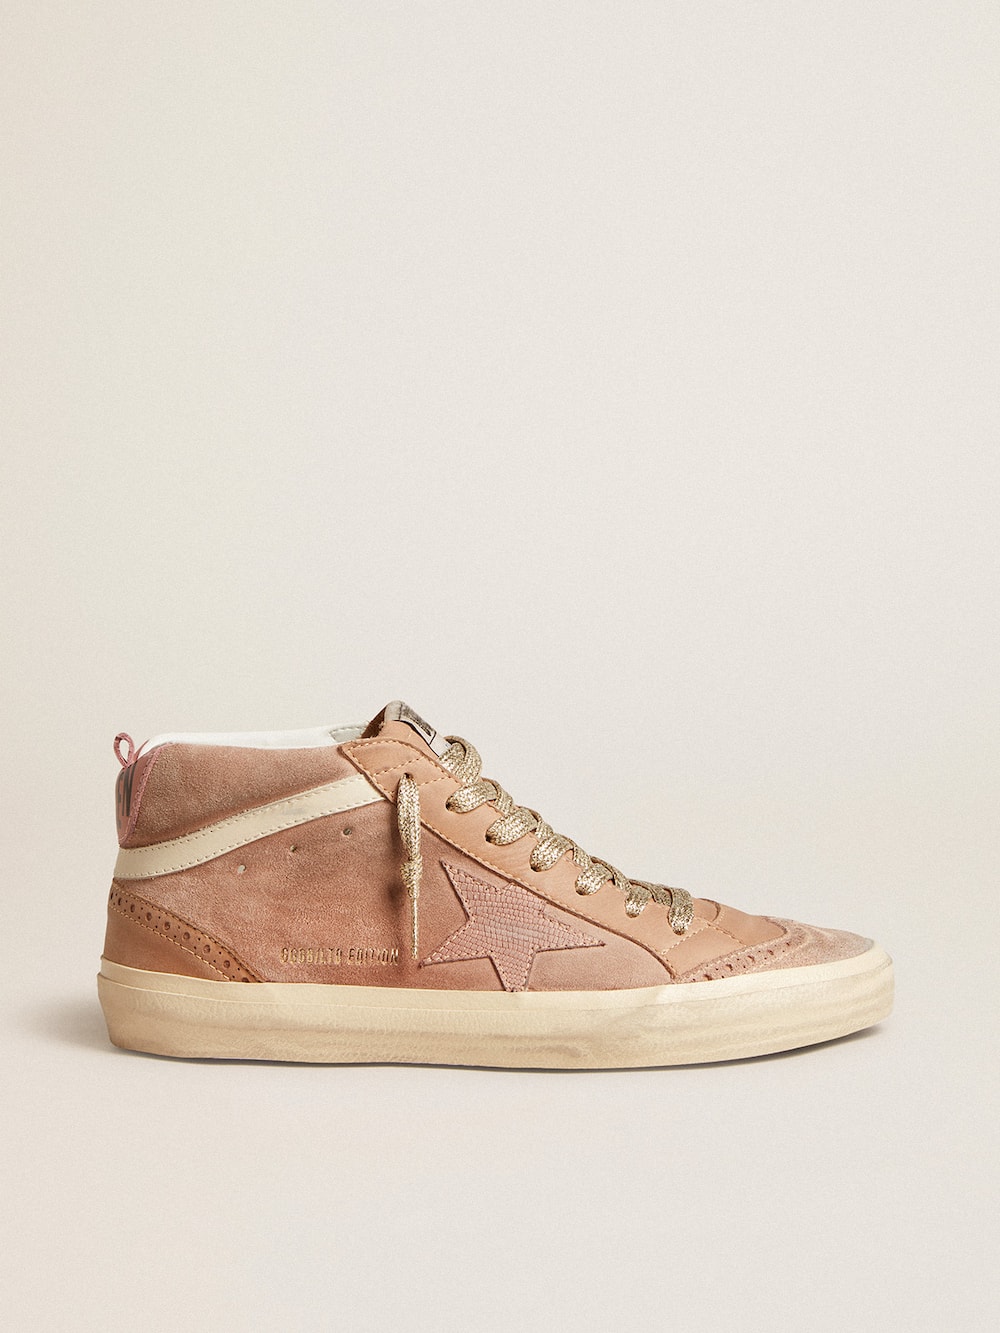 Golden Goose - Mid Star LTD in pink suede with pink lizard-print leather star in 